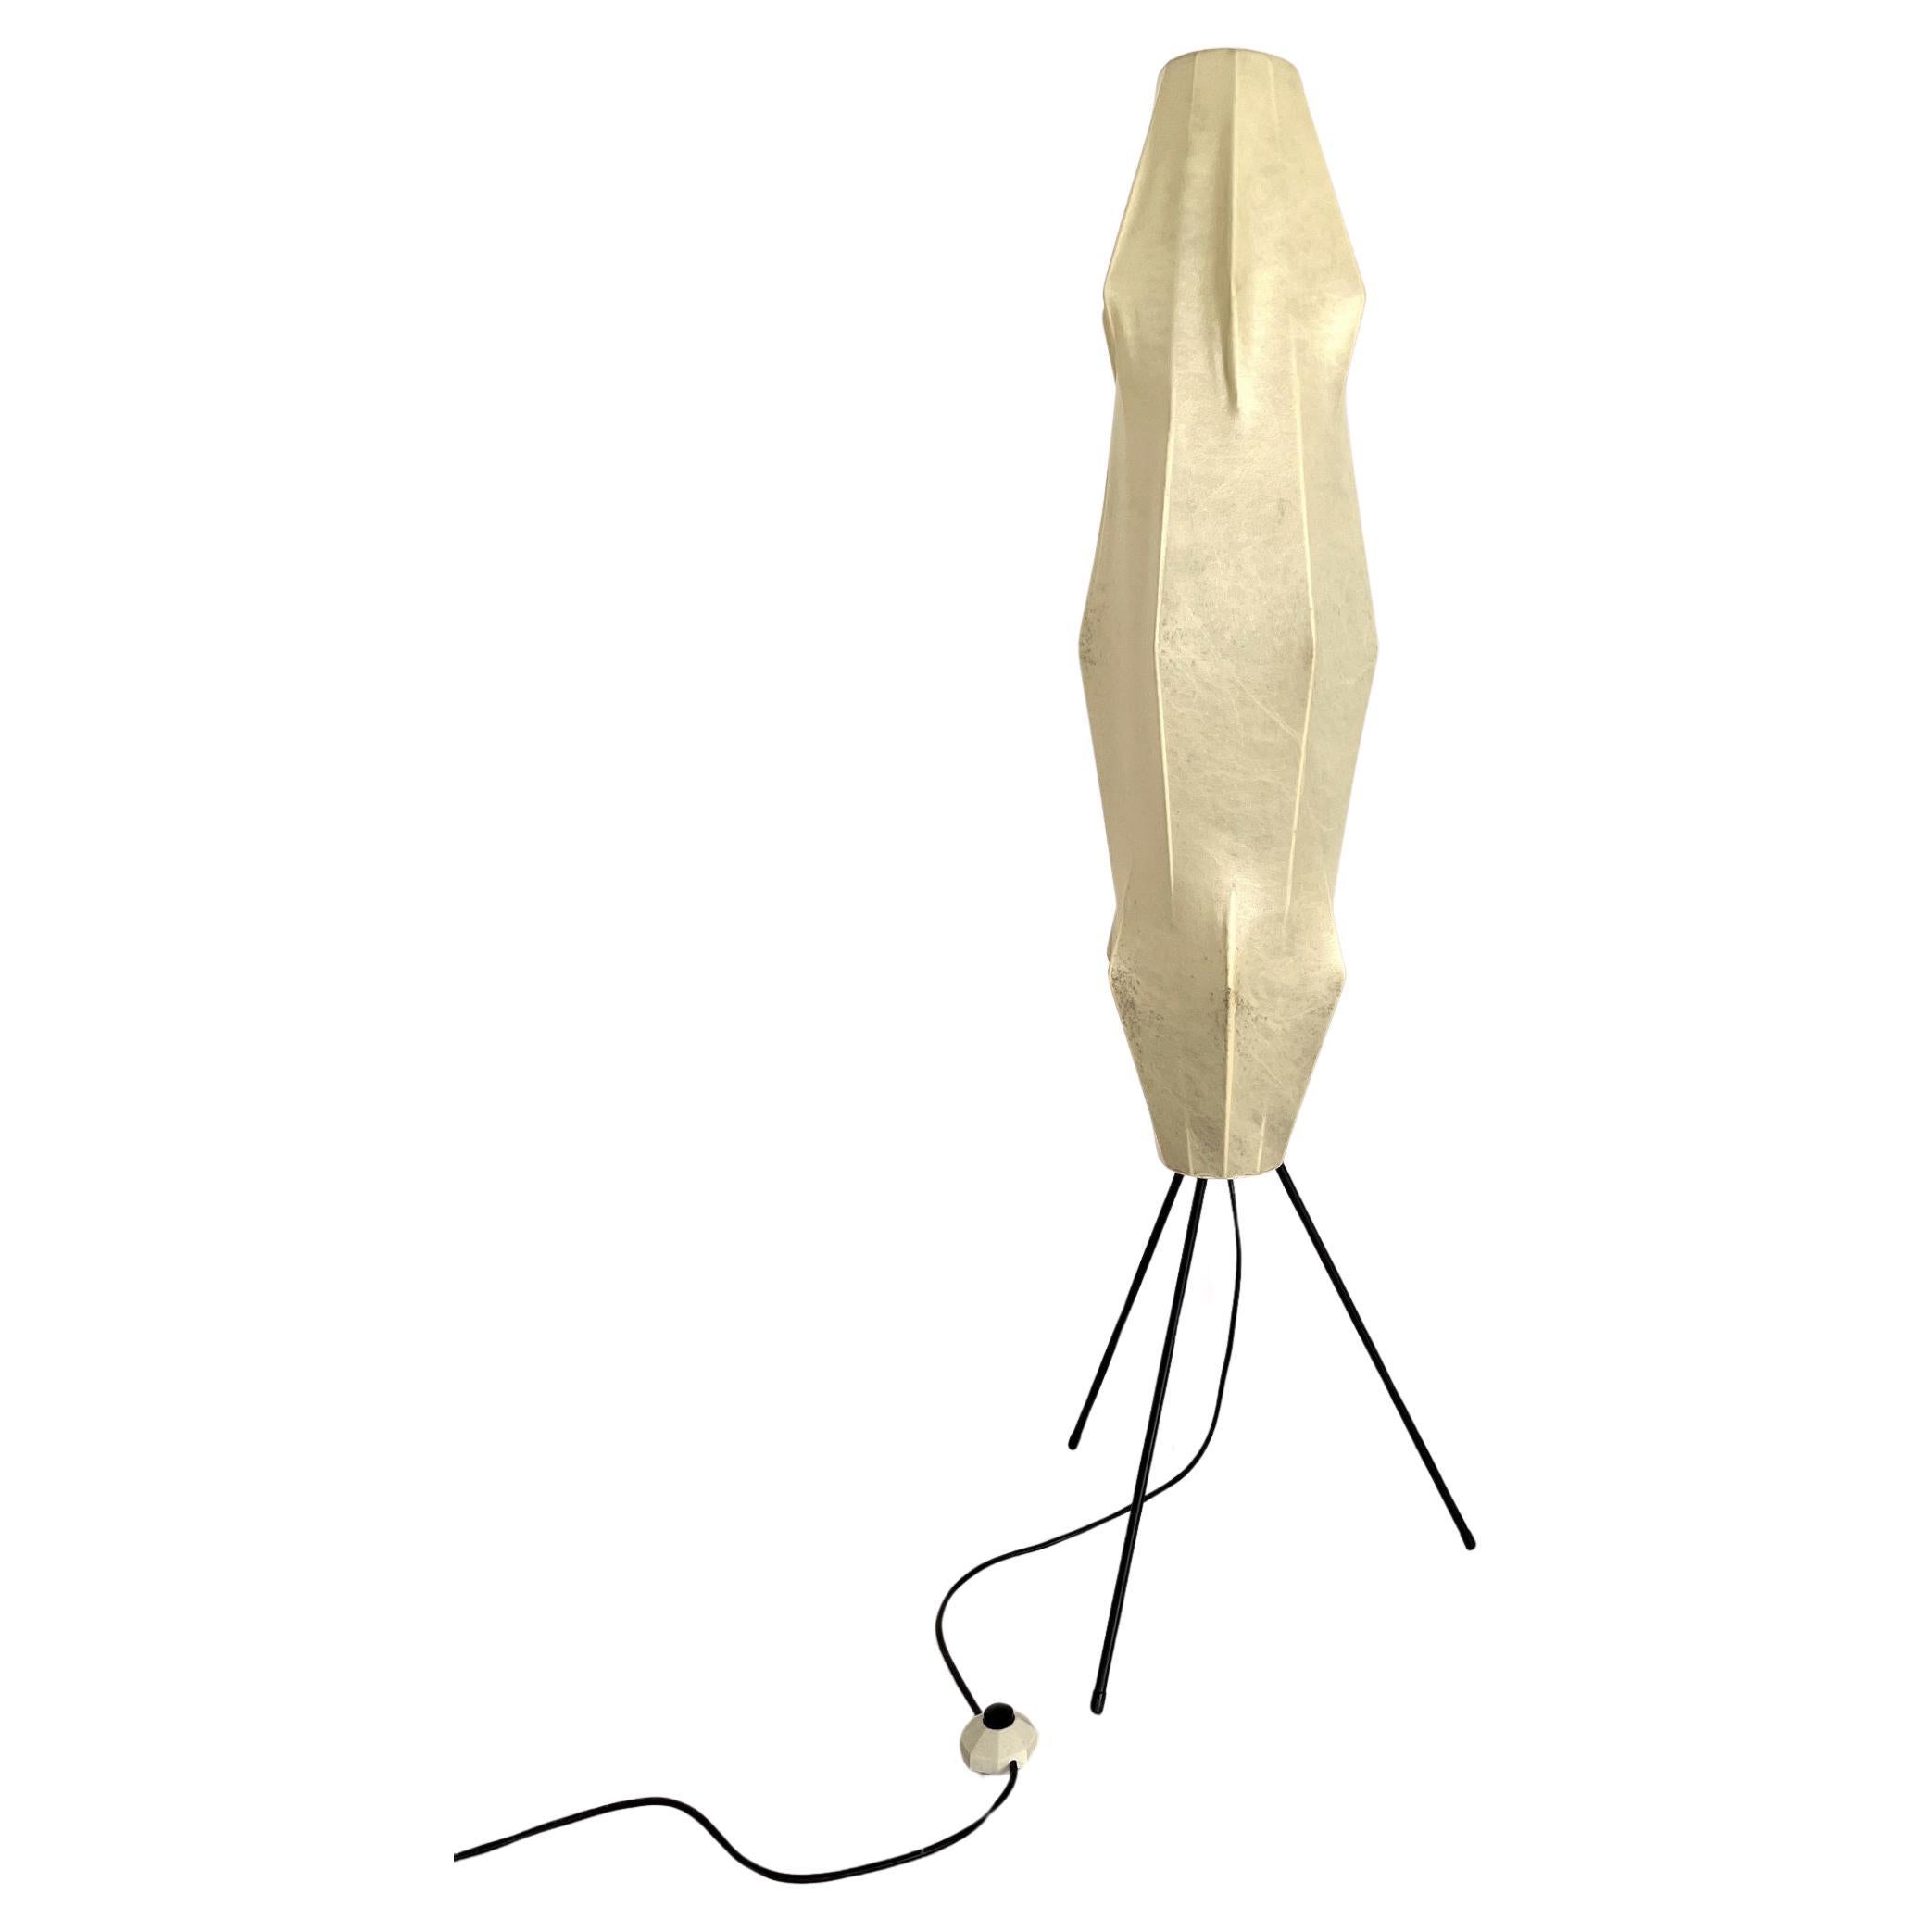 Midcentury Cocoon Floor Lamp with Metal Base by Goldkant, 1960s For Sale